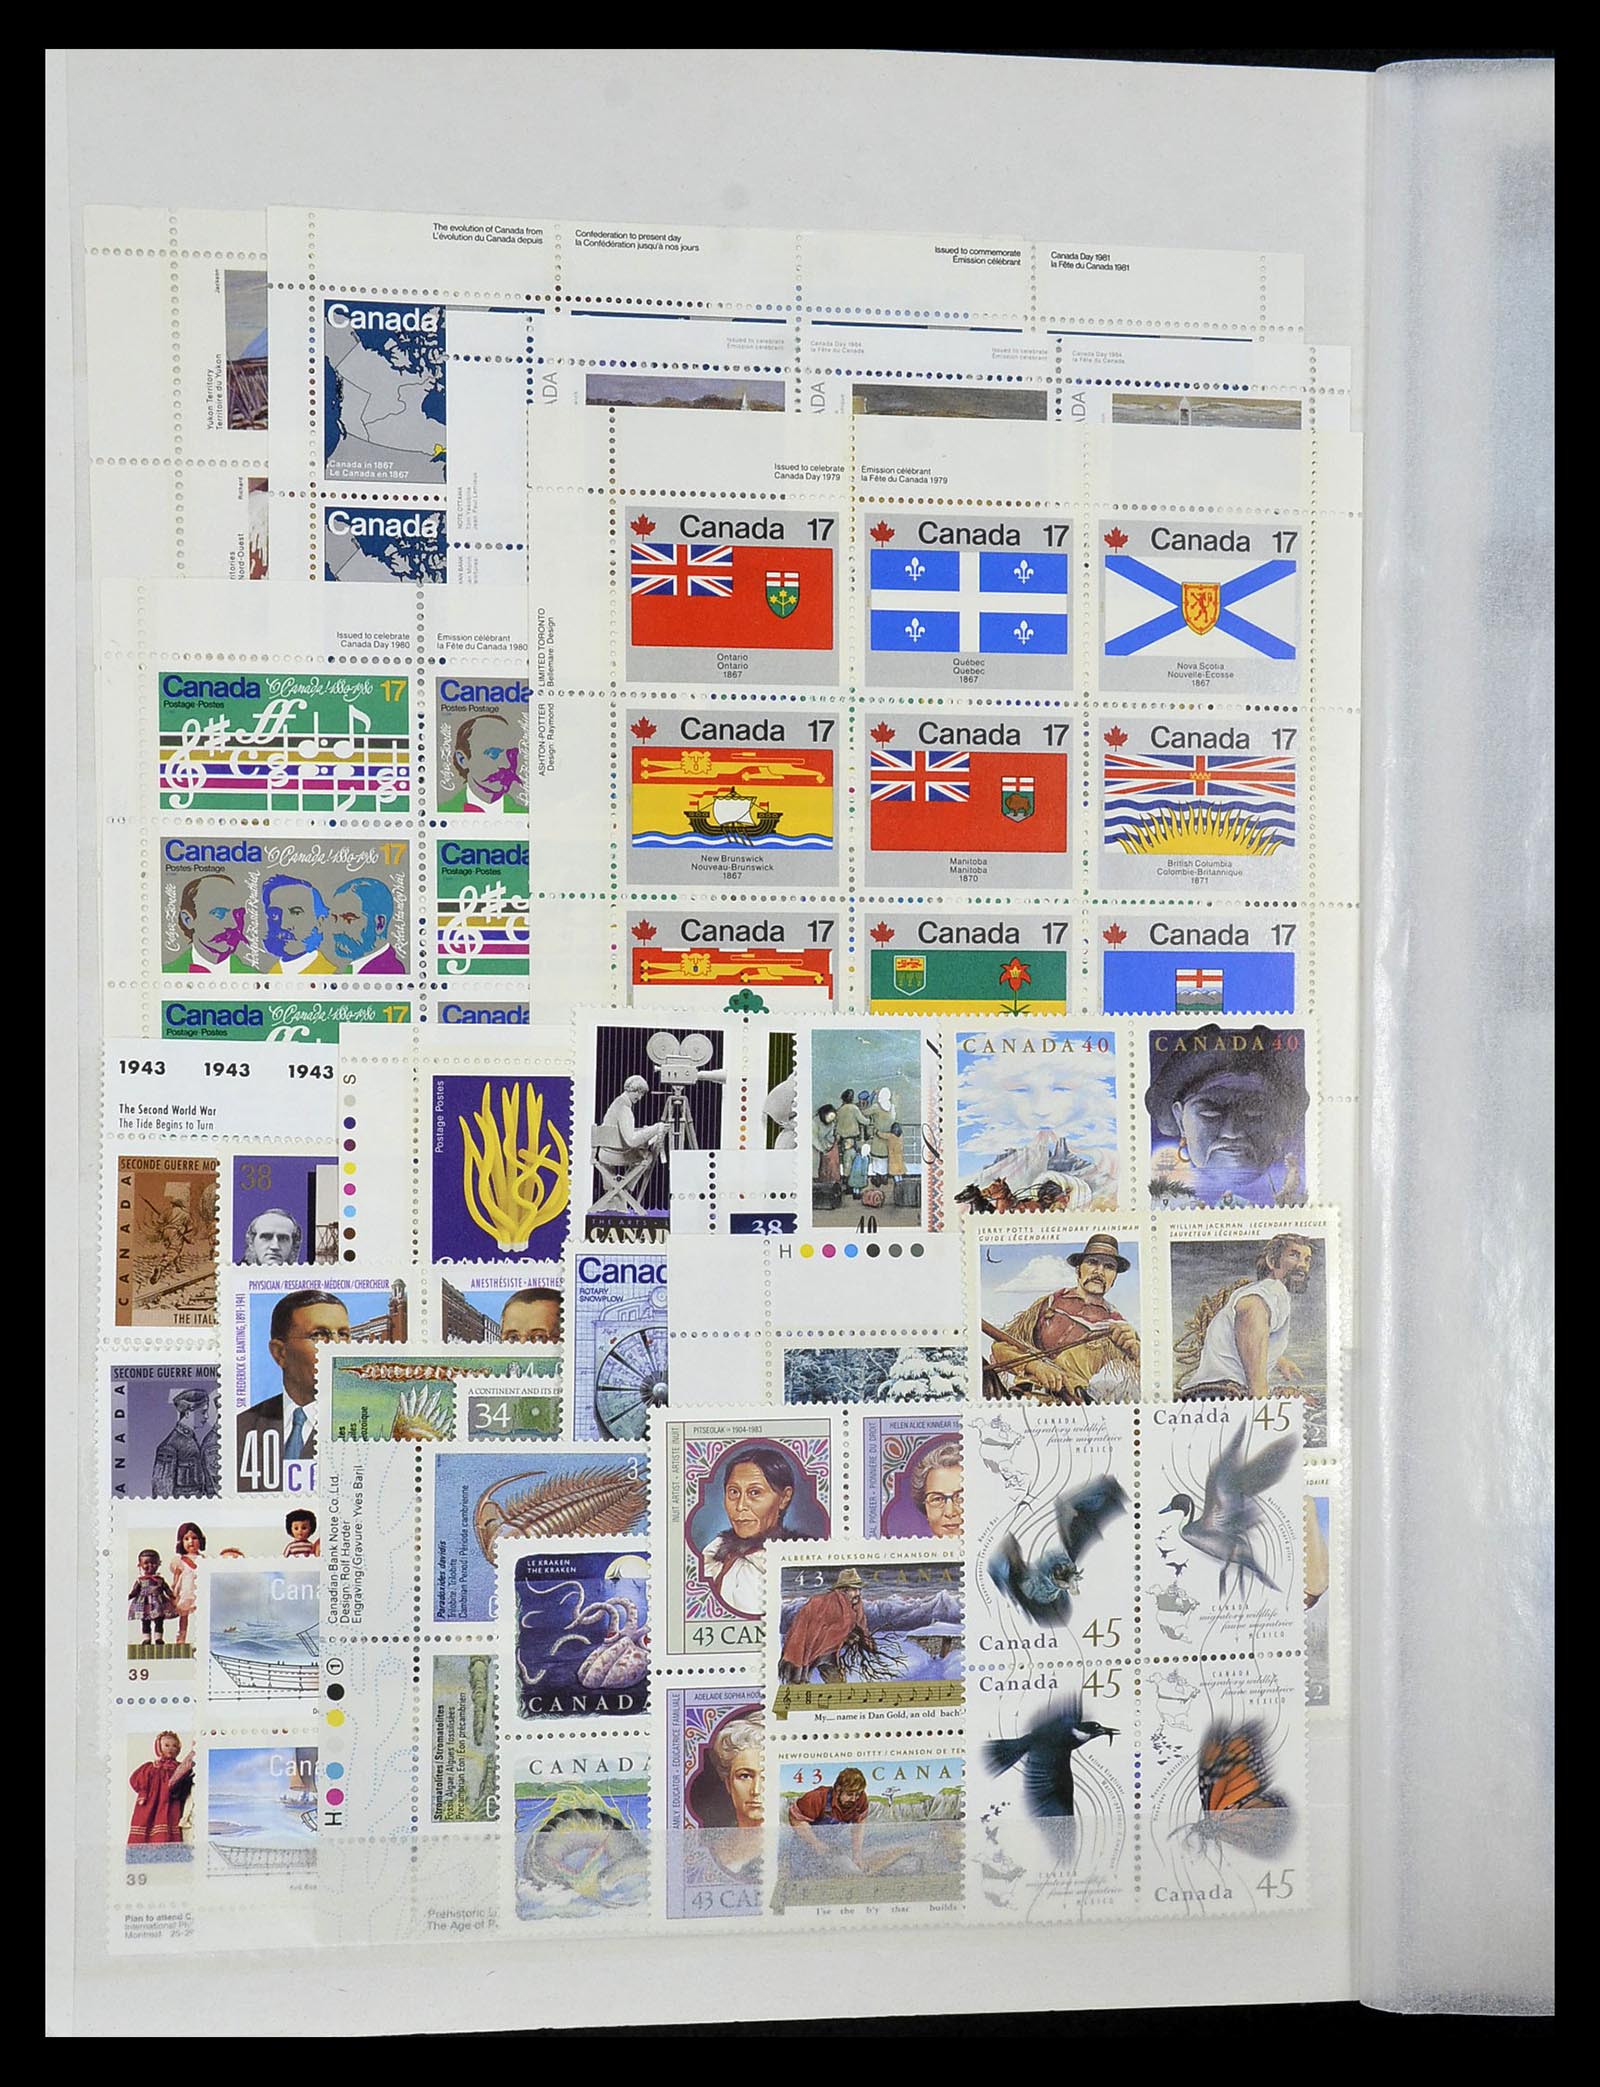 34326 032 - Stamp collection 34326 World MNH until 2018!